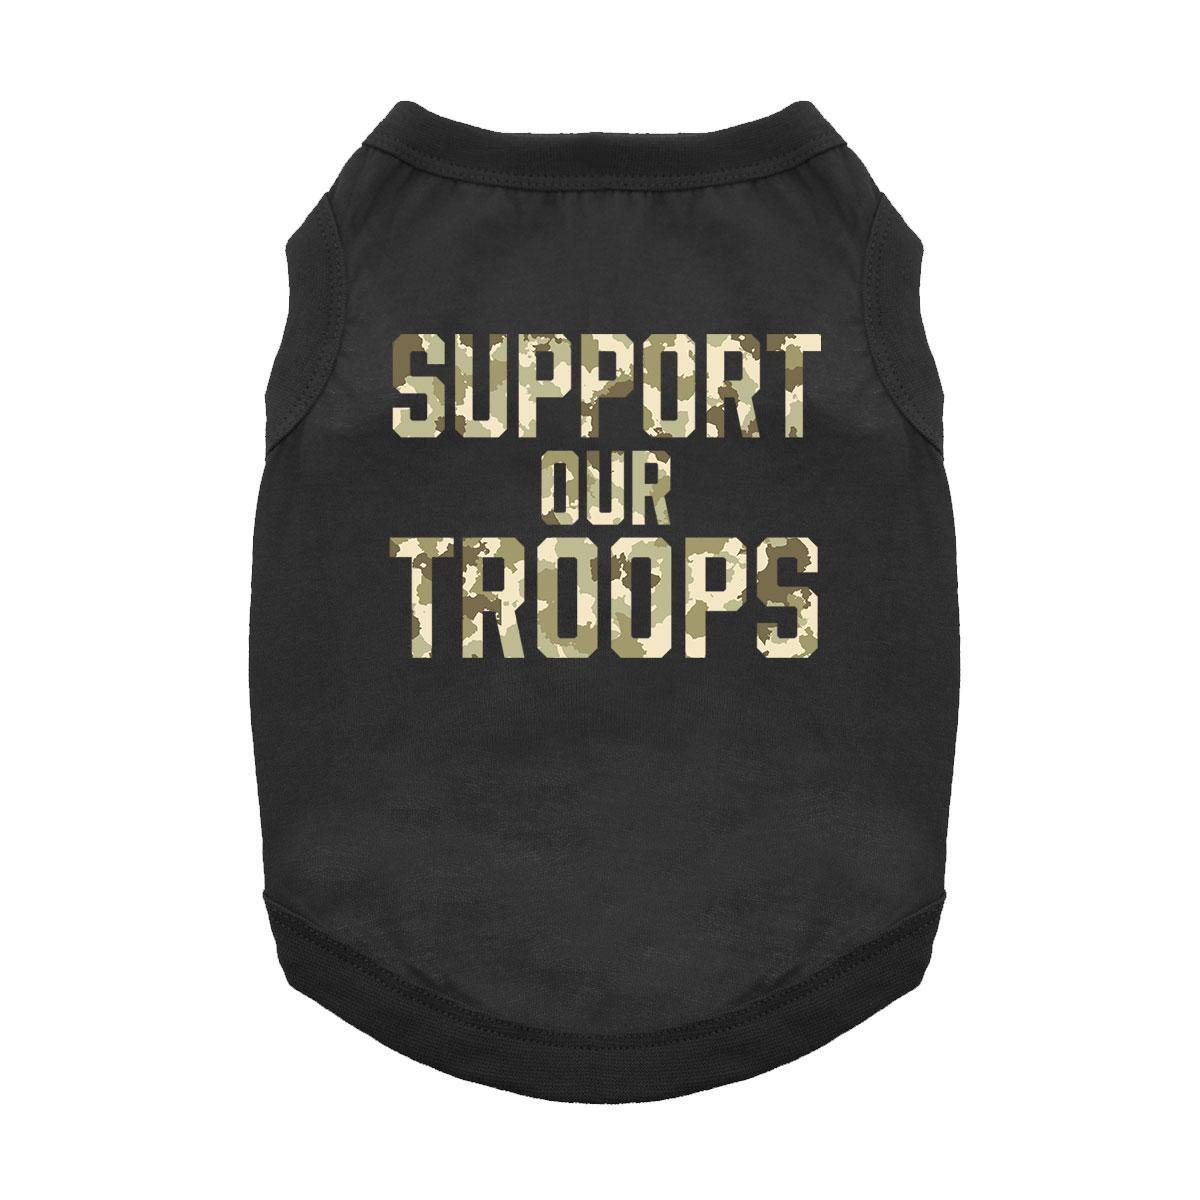 Support Our Troops Dog Shirt - Black